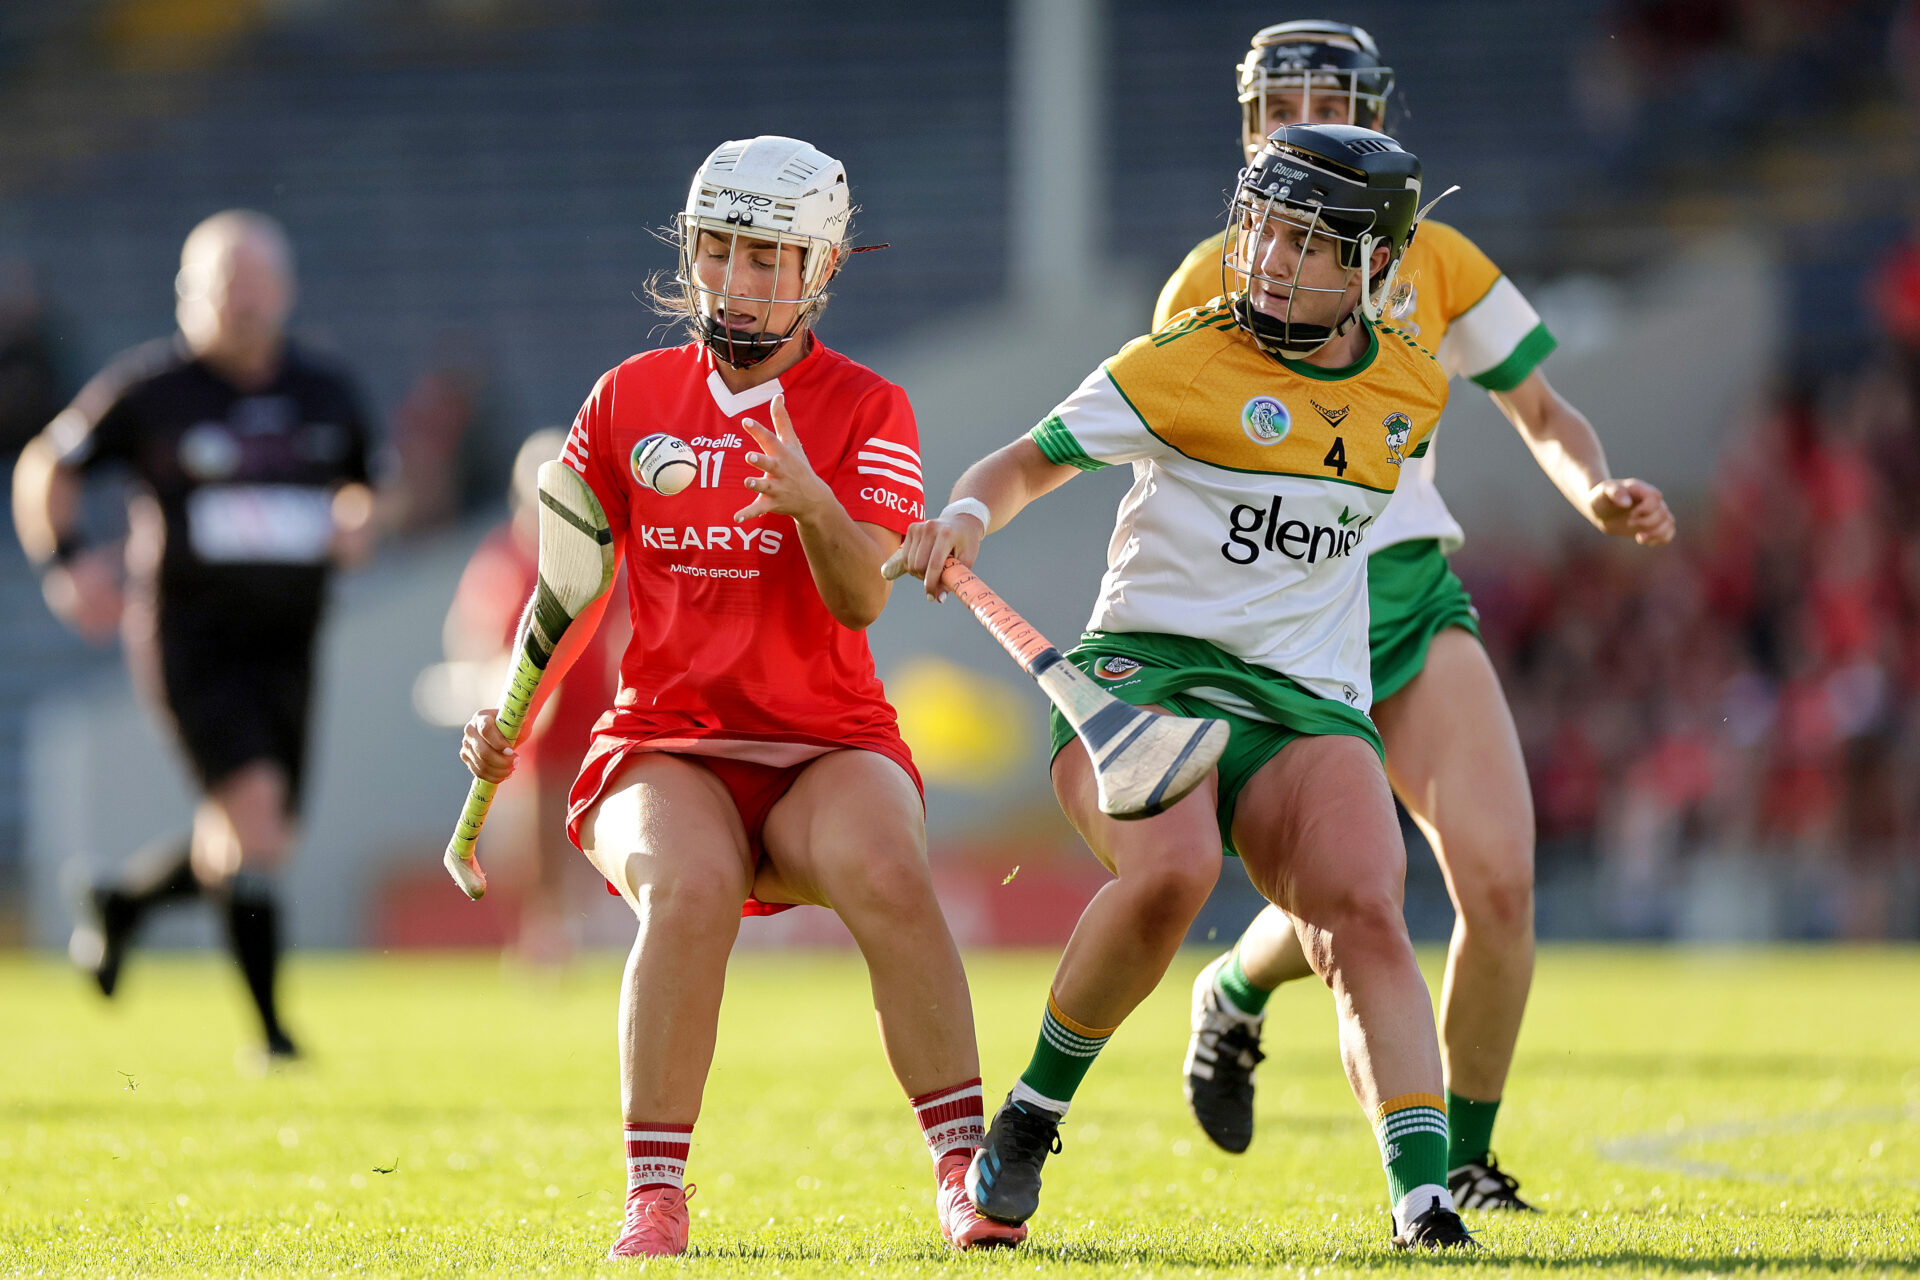 Cork strive for perfection, Kilkenny refuse to be denied